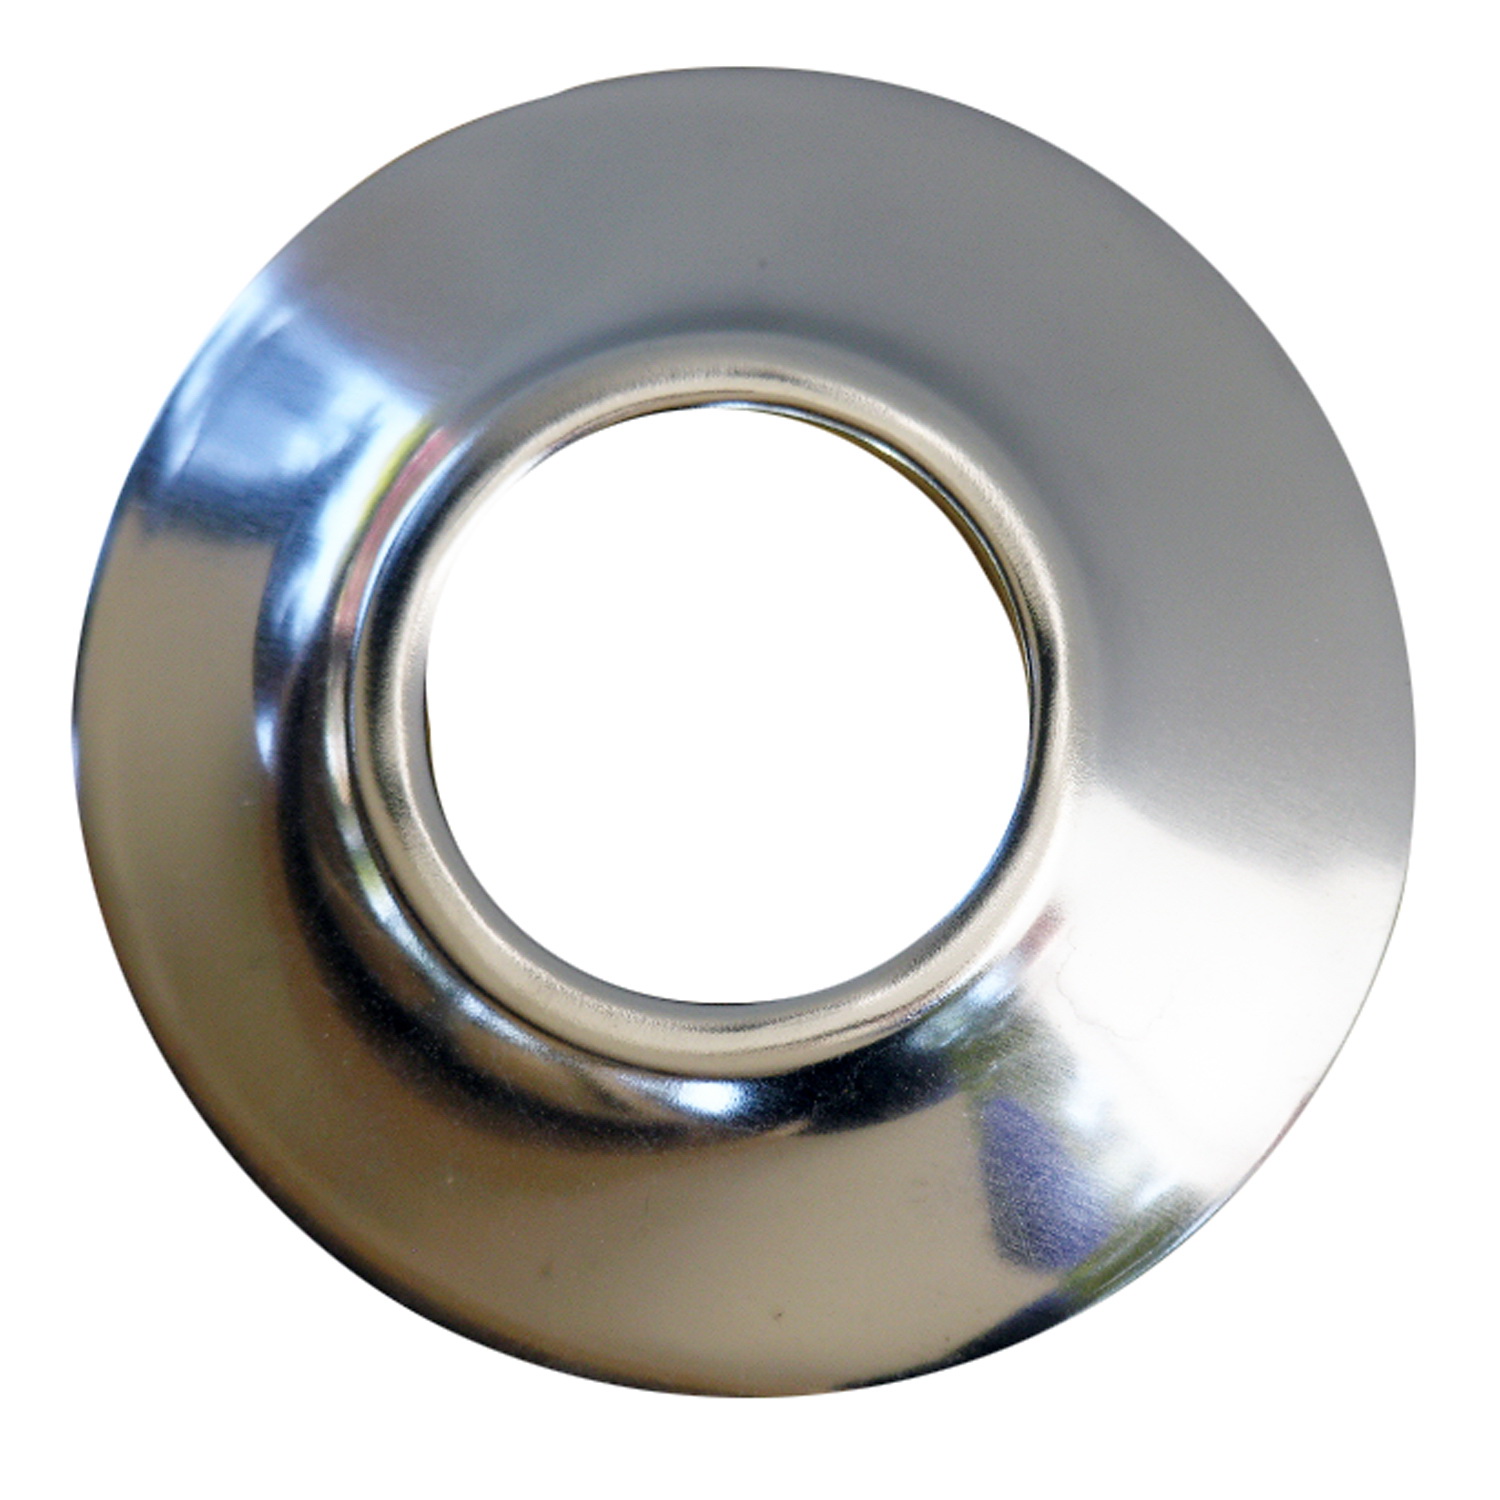 LASCO 03-1535 Sure Grip Flange, Chrome Plated, For: 3/4 in Iron Pipe, 1 in Copper Pipes - 1